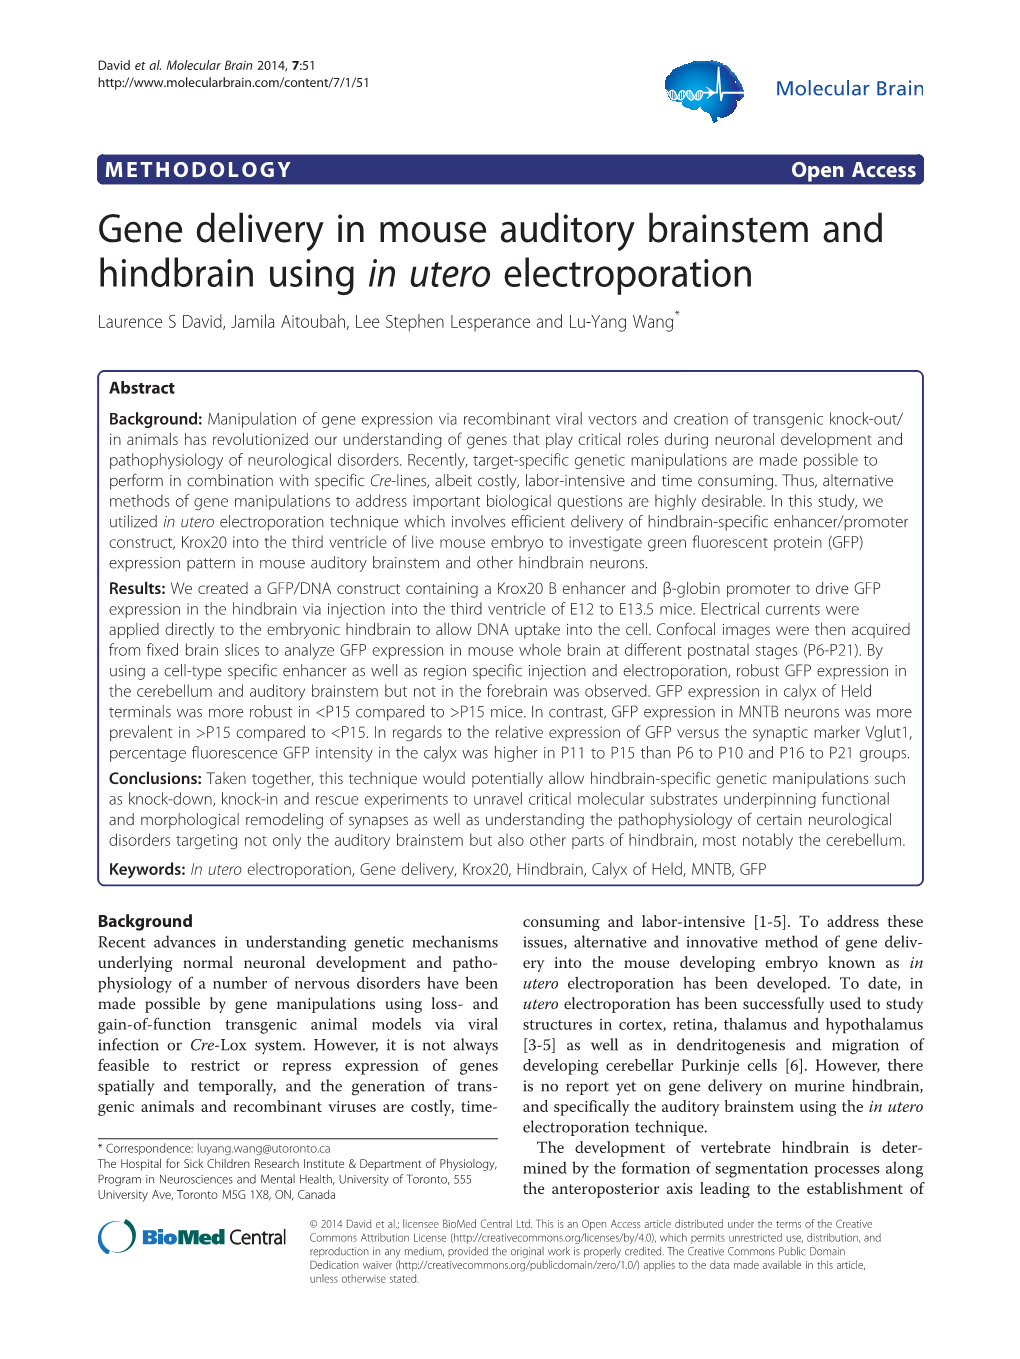 Gene Delivery in Mouse Auditory Brainstem and Hindbrain Using in Utero Electroporation Laurence S David, Jamila Aitoubah, Lee Stephen Lesperance and Lu-Yang Wang*